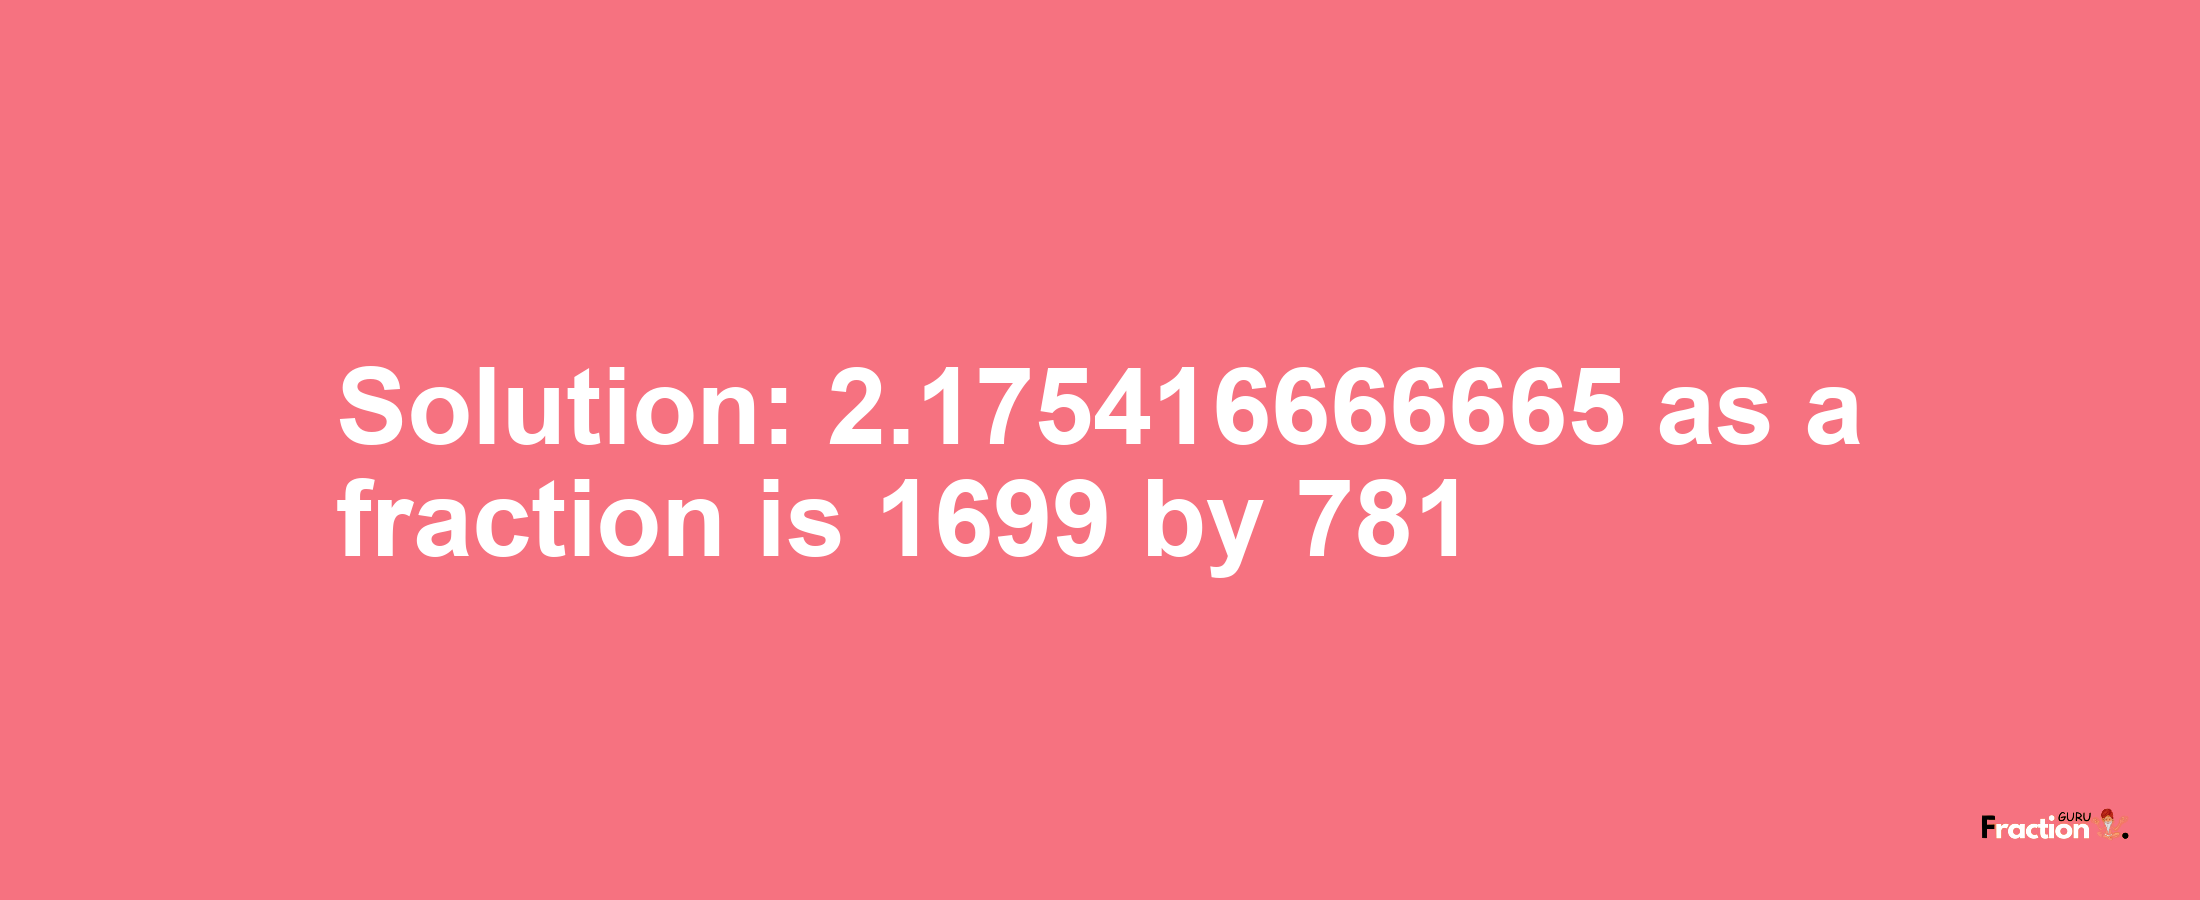 Solution:2.175416666665 as a fraction is 1699/781